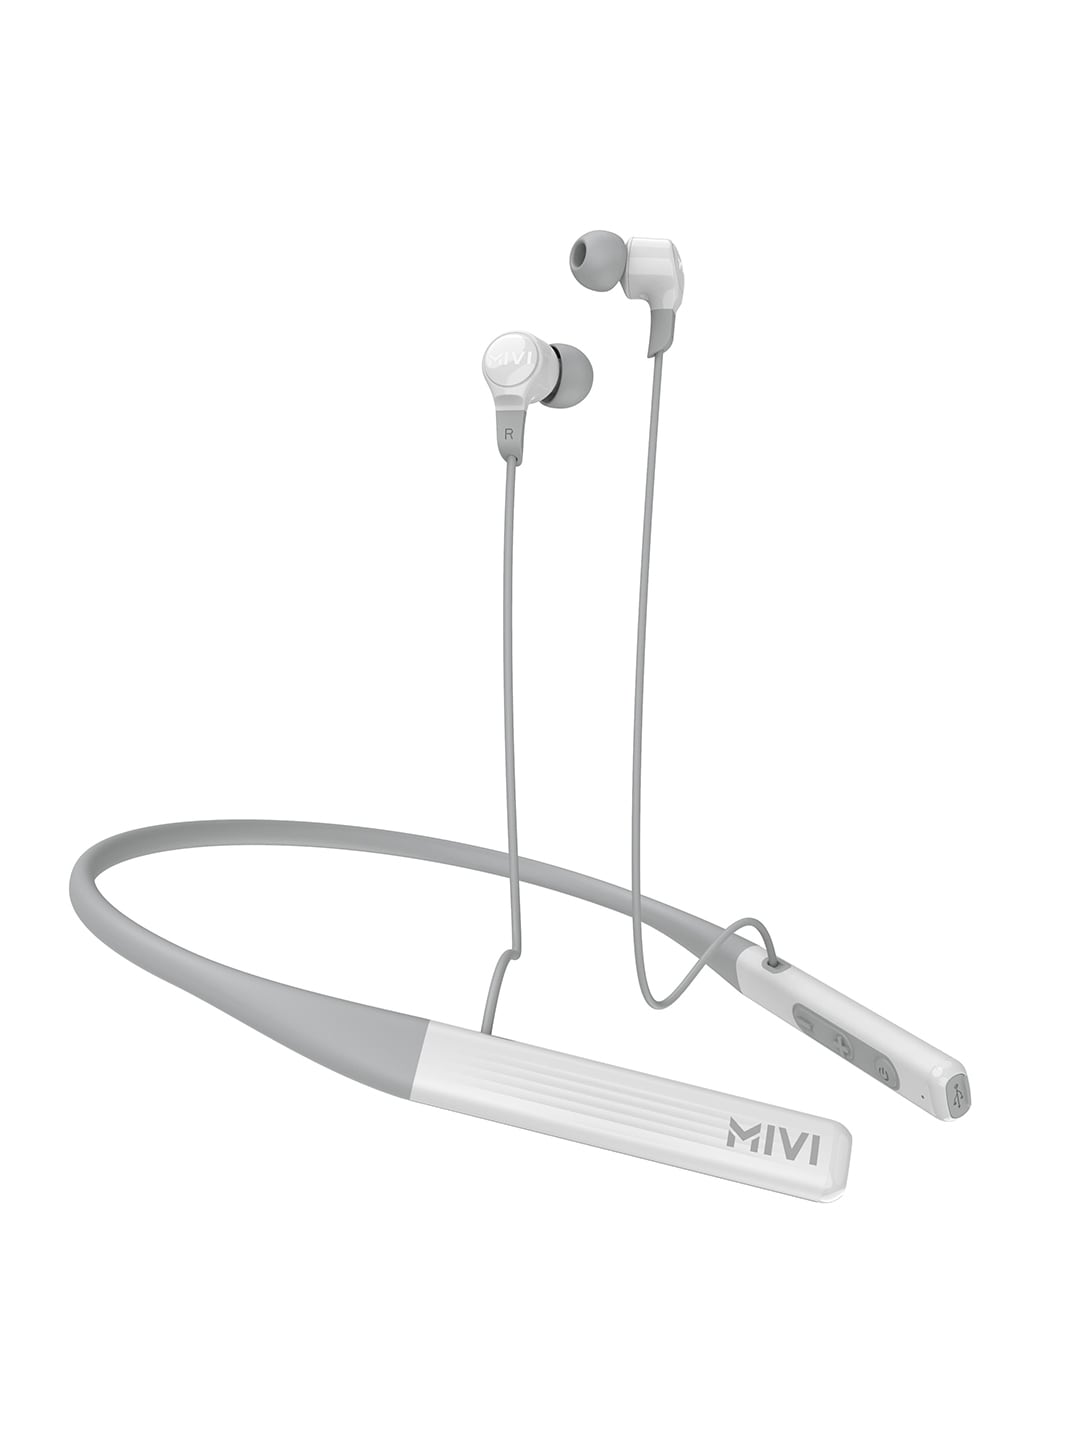 mivi Collar 2B Wireless Earphones with Fast Charging, 17hrs Playtime - Grey Price in India